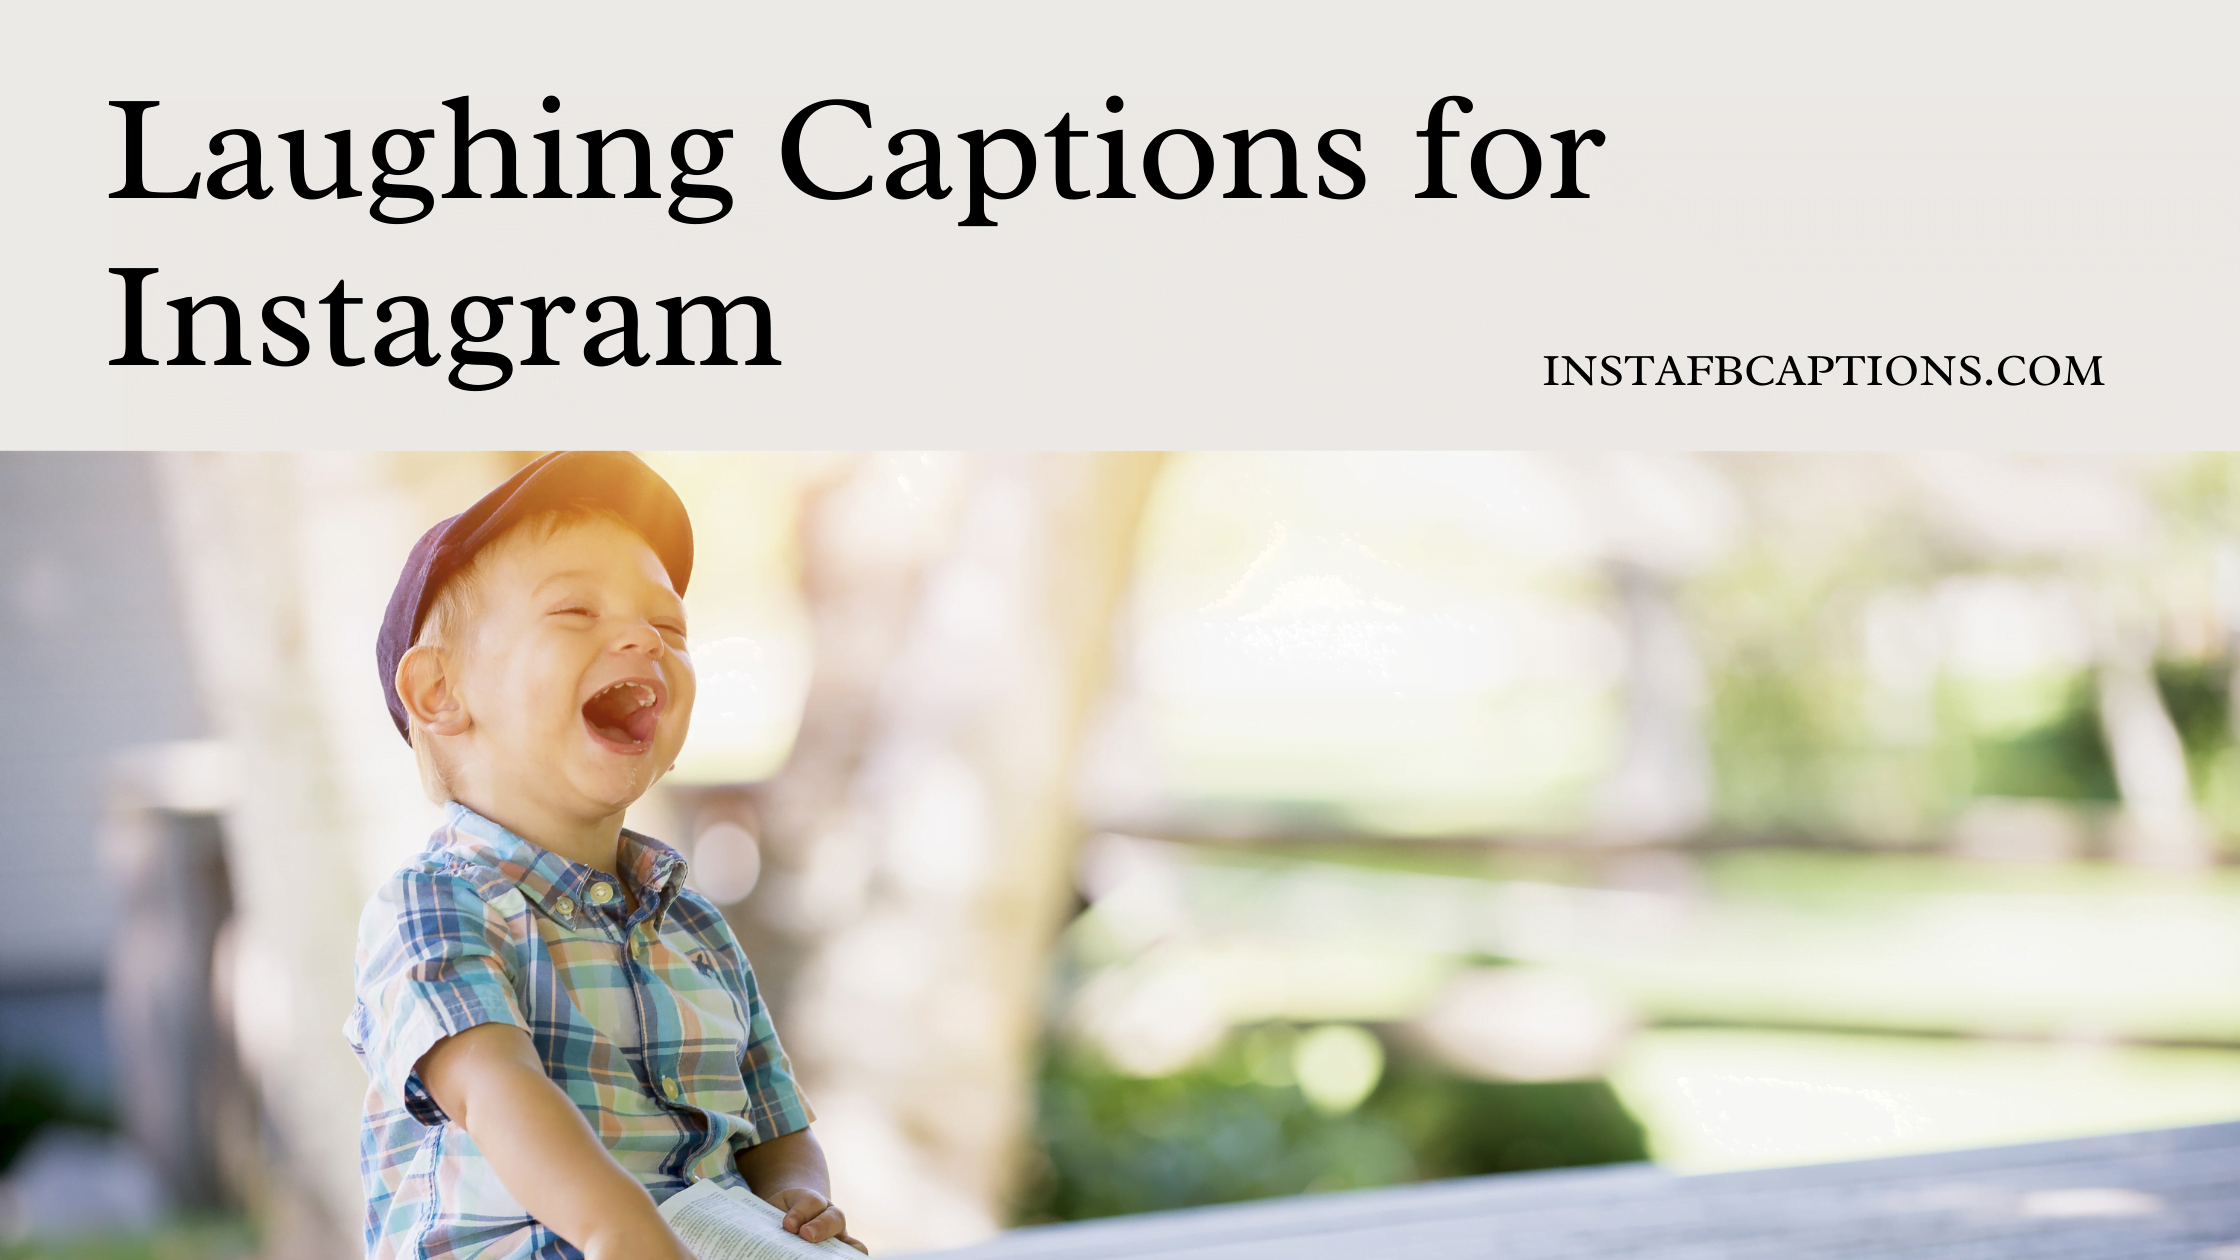 Laughing Captions For Instagram  - Laughing Captions for Instagram - 92 Funny Laughing Instagram Captions Quotes in 2022